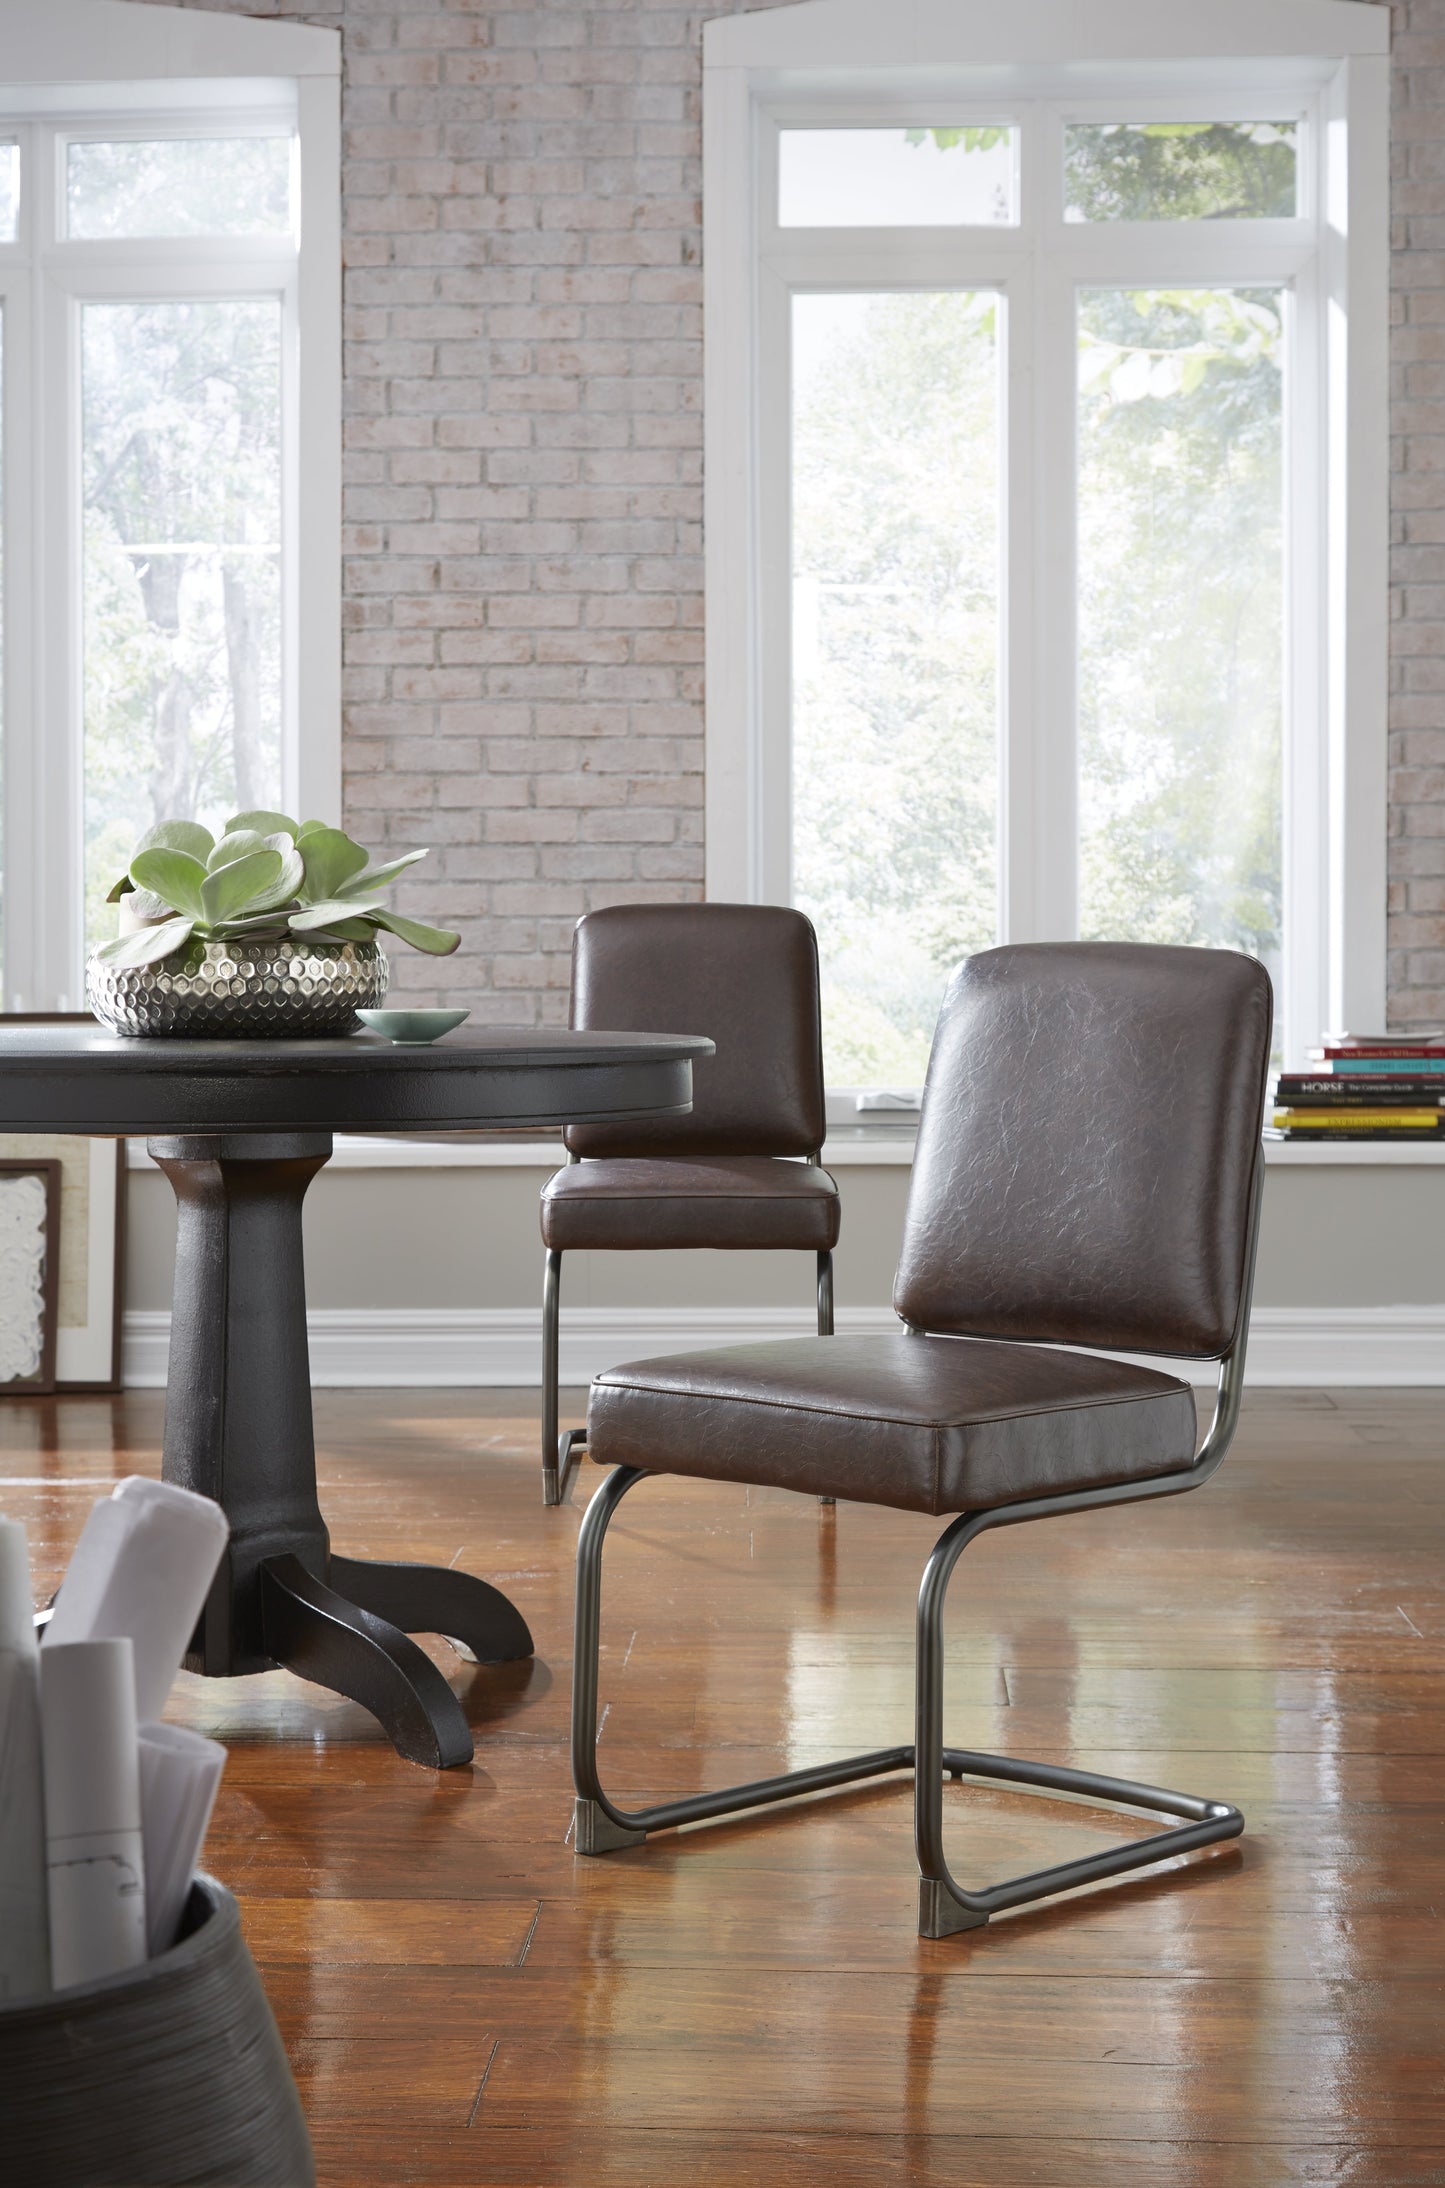 Modus Crossroads State Chair in Chocolate